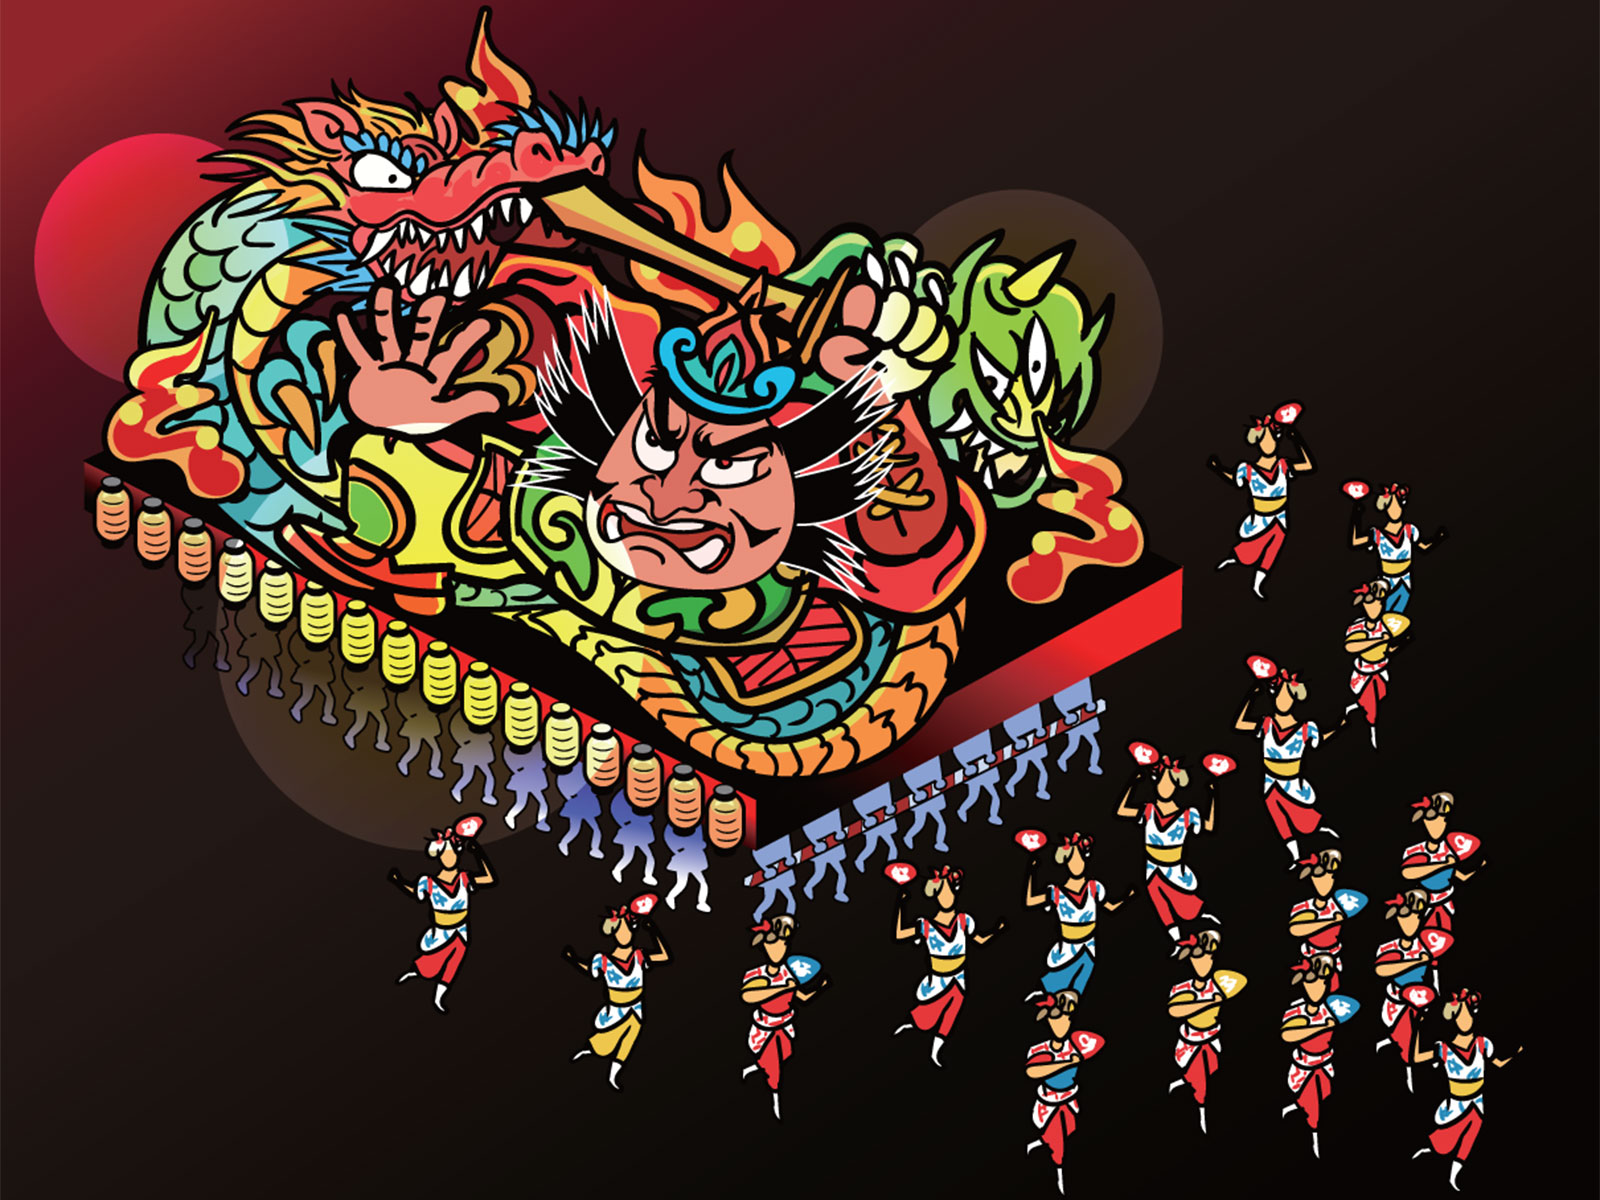 A brightly-coloured illustration of an Aomori Nebuta Festival float. A dragon sits atop the float, which is carried from below by many people. Dancer perform in front of the float. ©istockphoto.com by freehandz